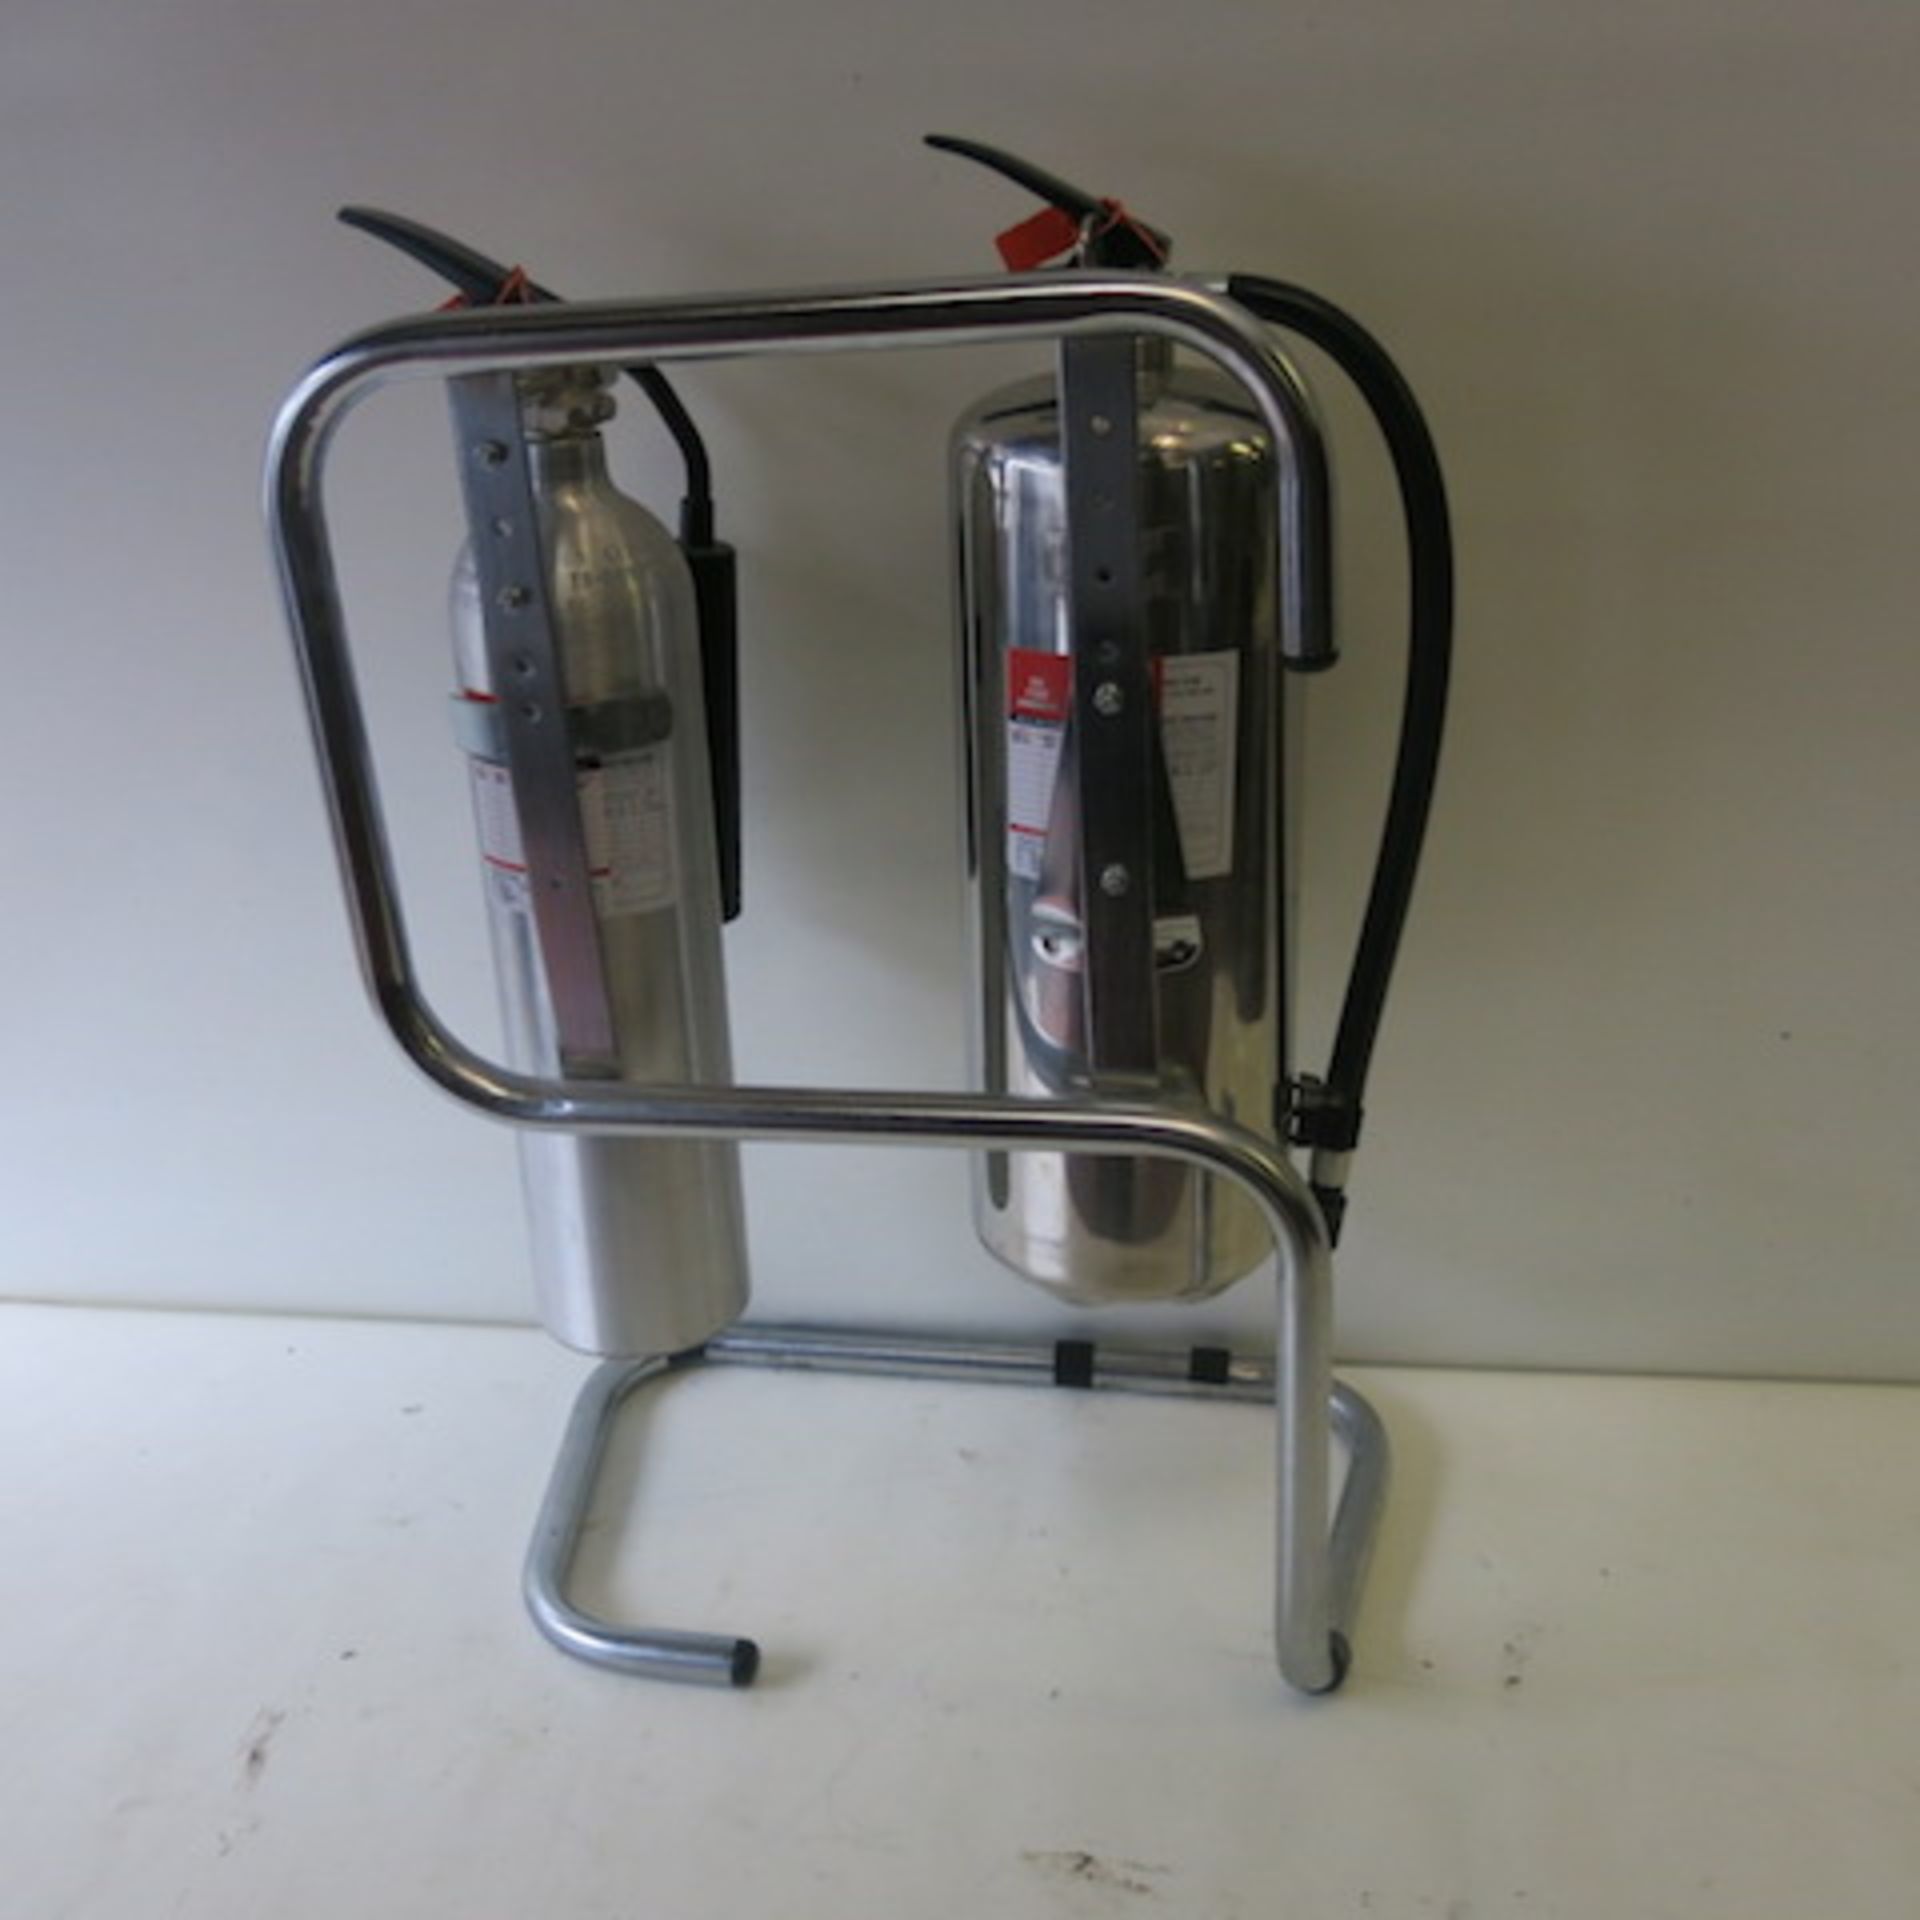 2 x Stainless Steel/Aluminum Fire Extinguishers on Frame, 1 Foam, 1 Carbon Dioxide, Discharge Date - Image 4 of 4